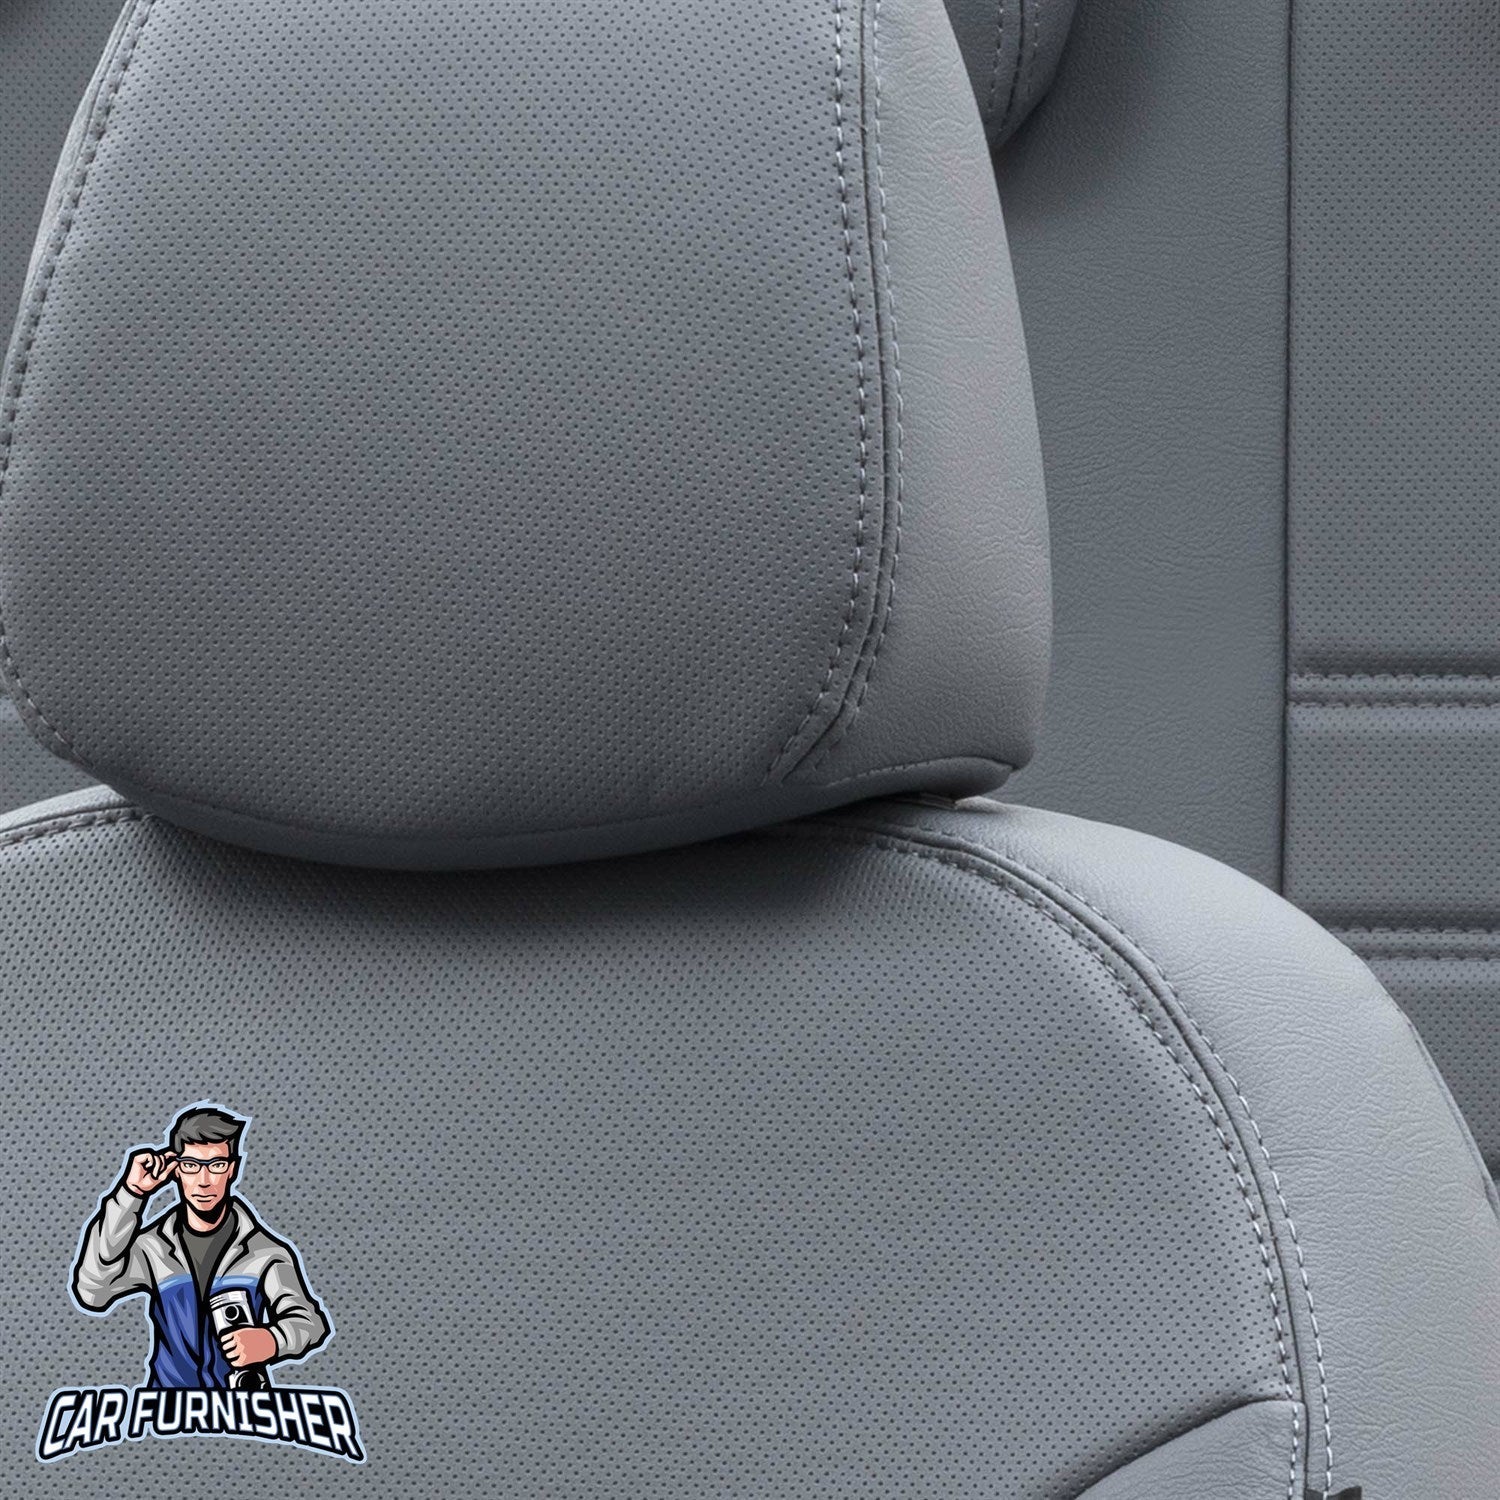 Honda City Seat Covers Istanbul Leather Design Smoked Leather